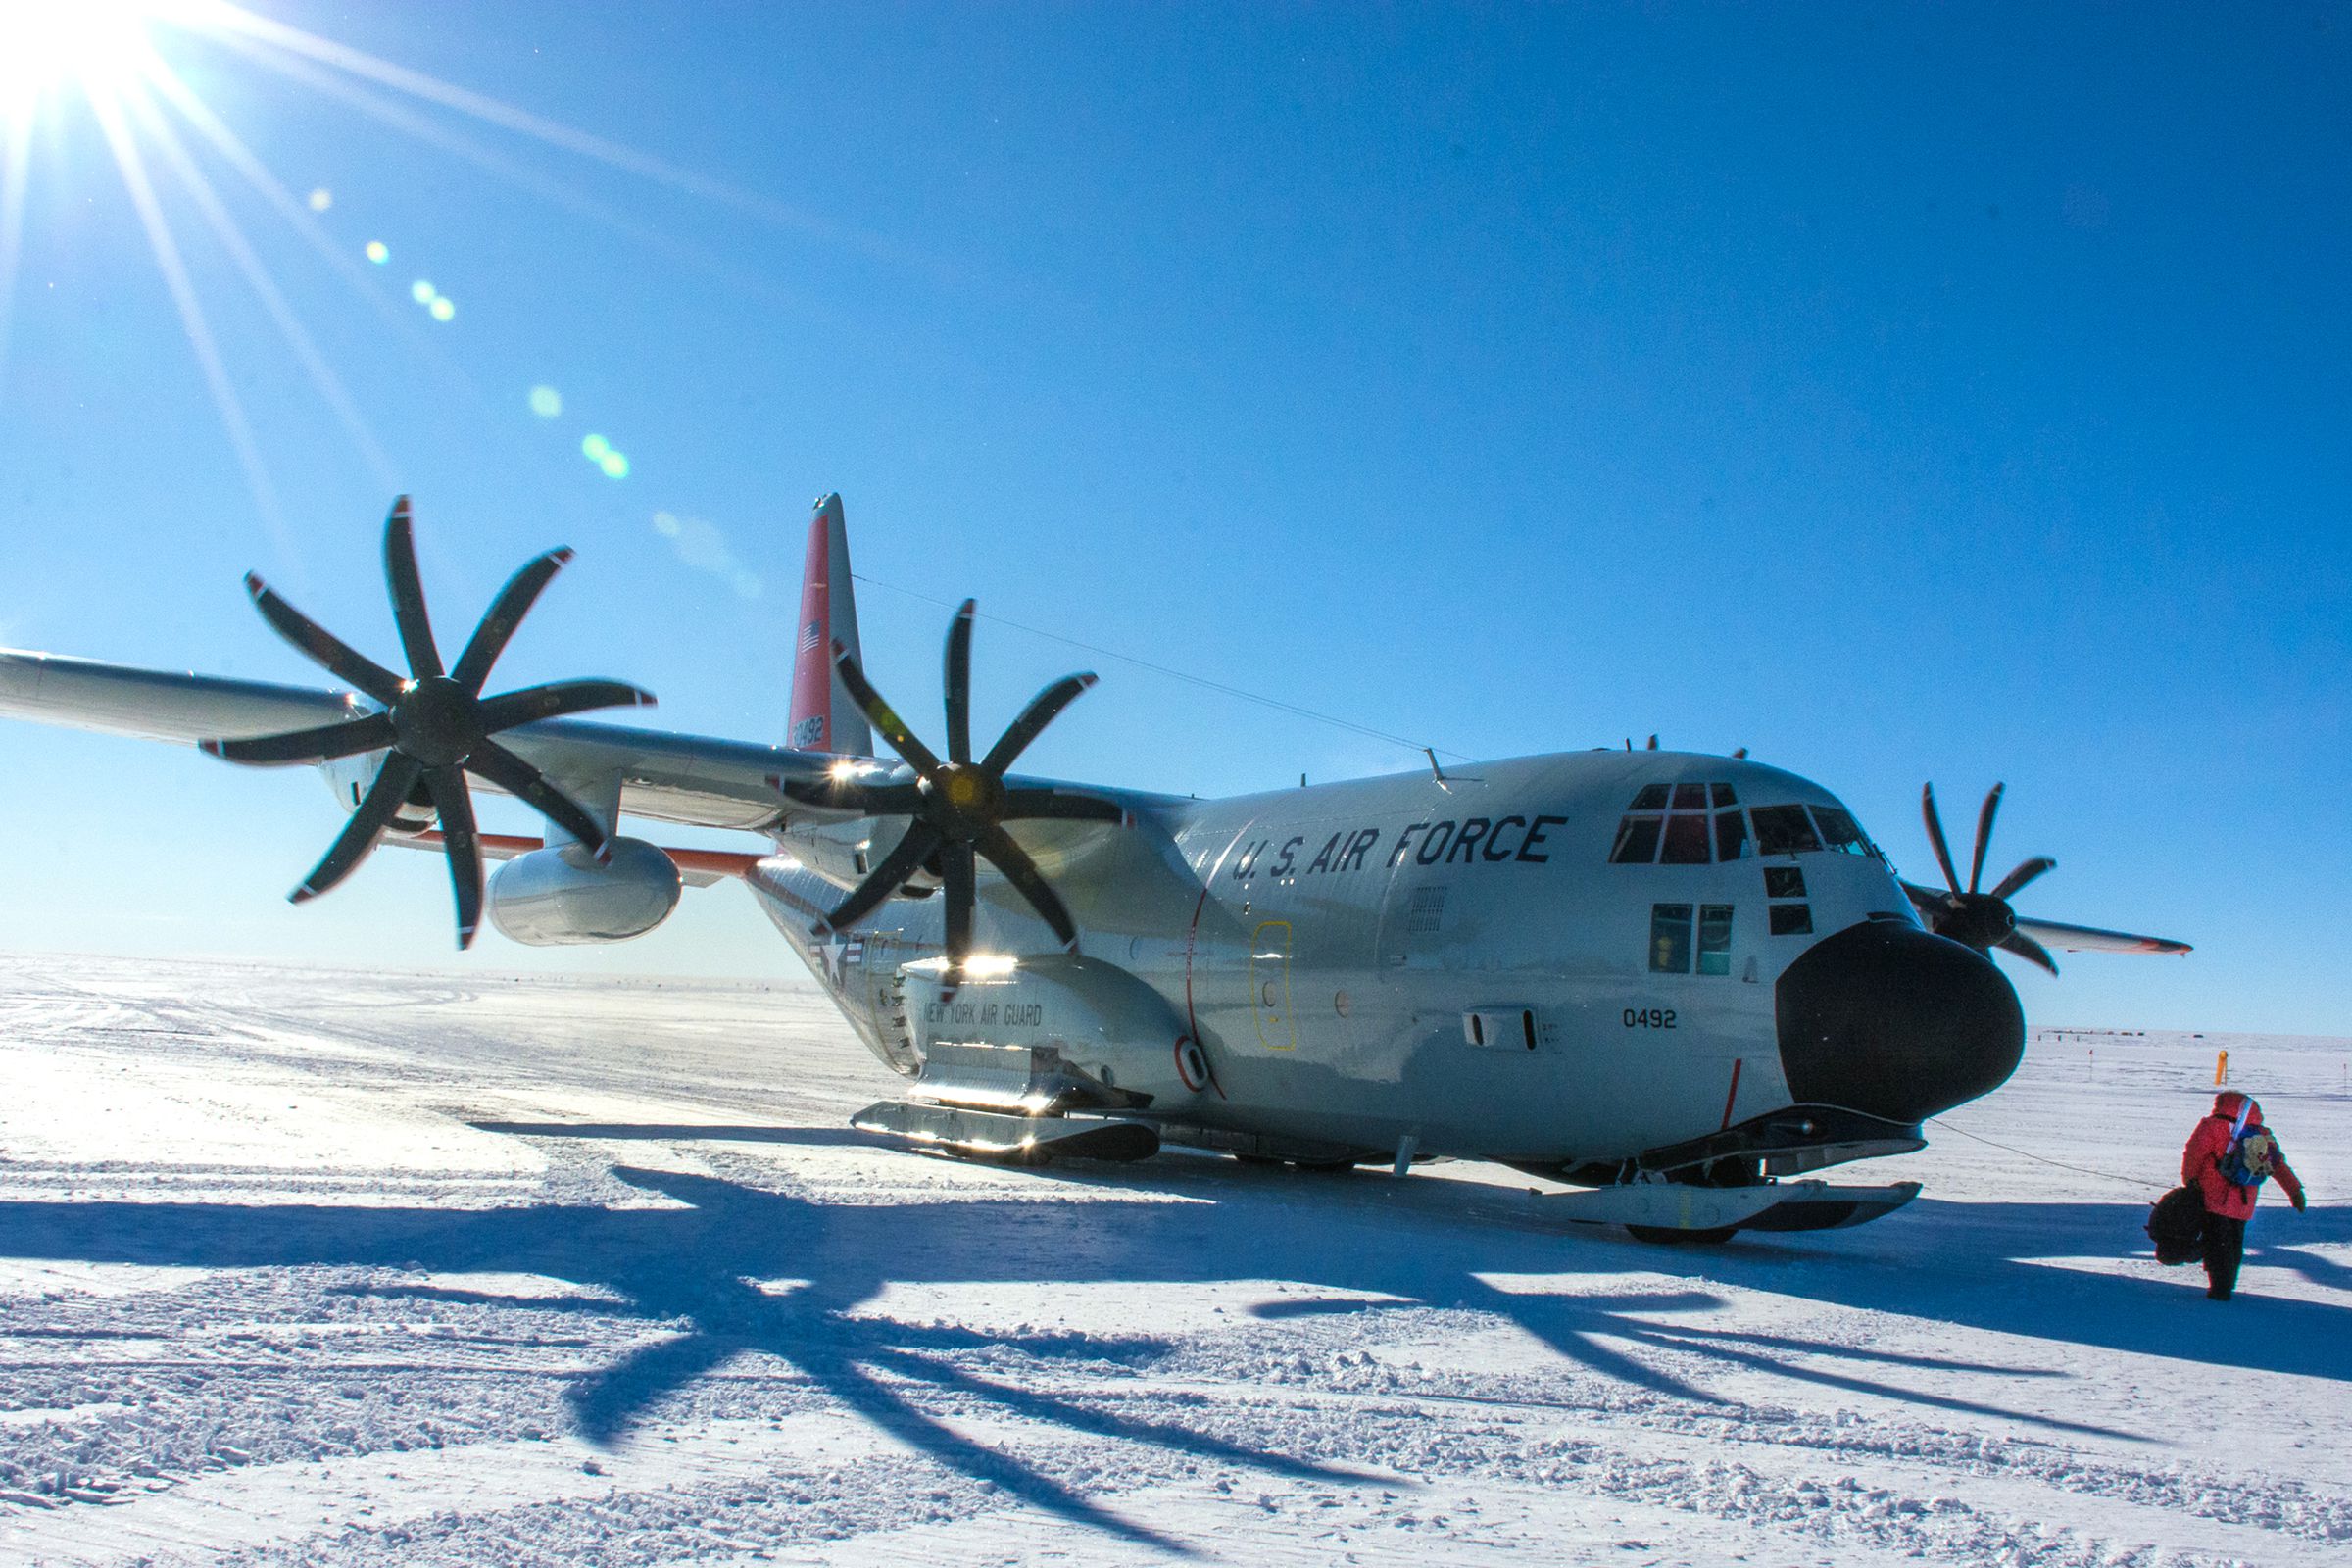 A ski-equipped LC-130 aircraft at NSF's Amundsen-Scott South Pole Station, the same plane used to evacuate Buzz Aldrin